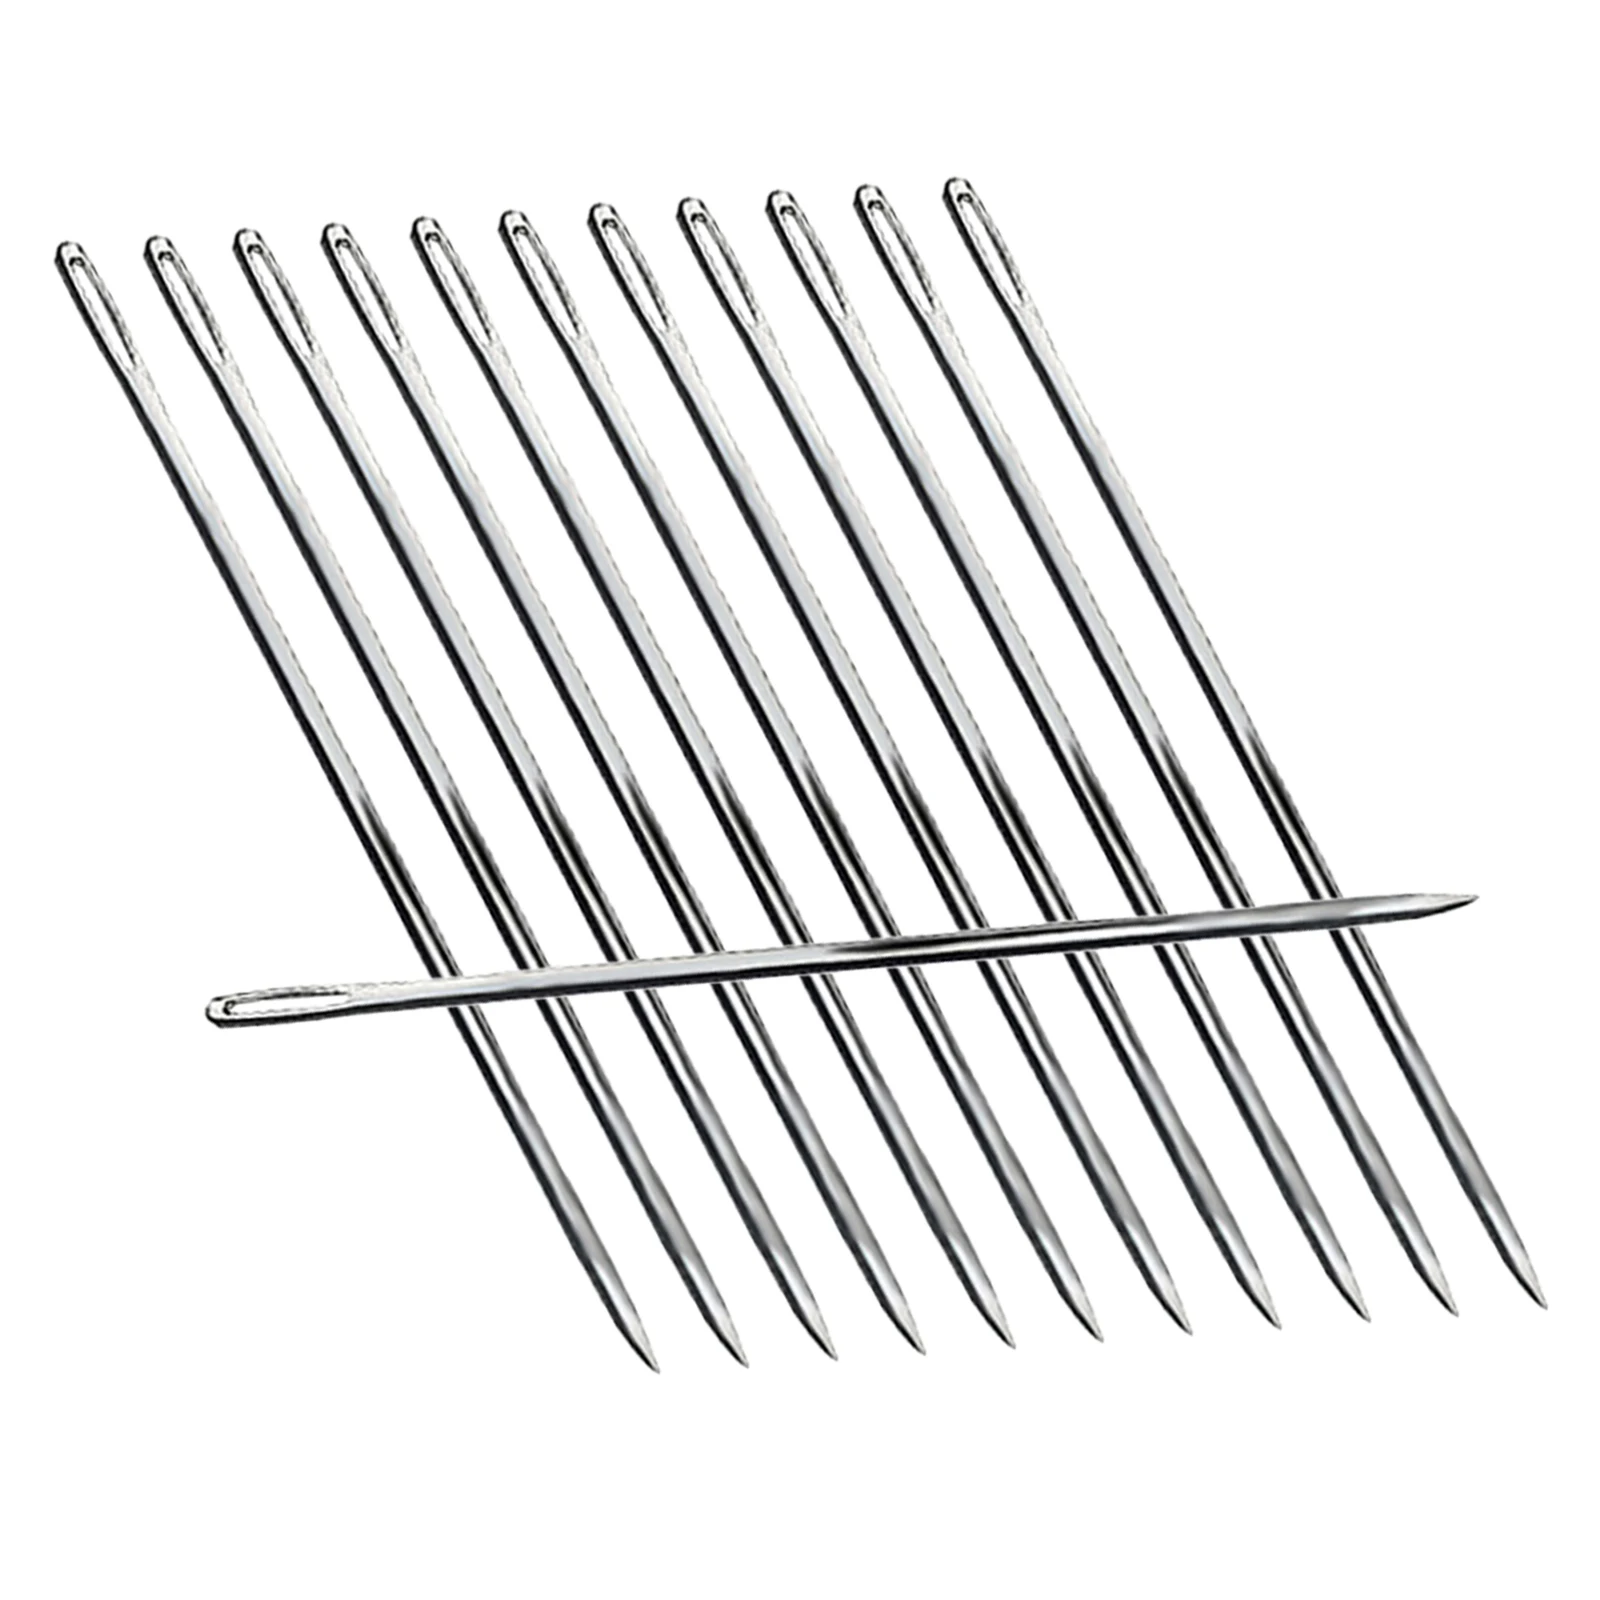 12pcs Wig Pins 6cm Straight Needles for Sewing Craft Wigs Tool Model Making